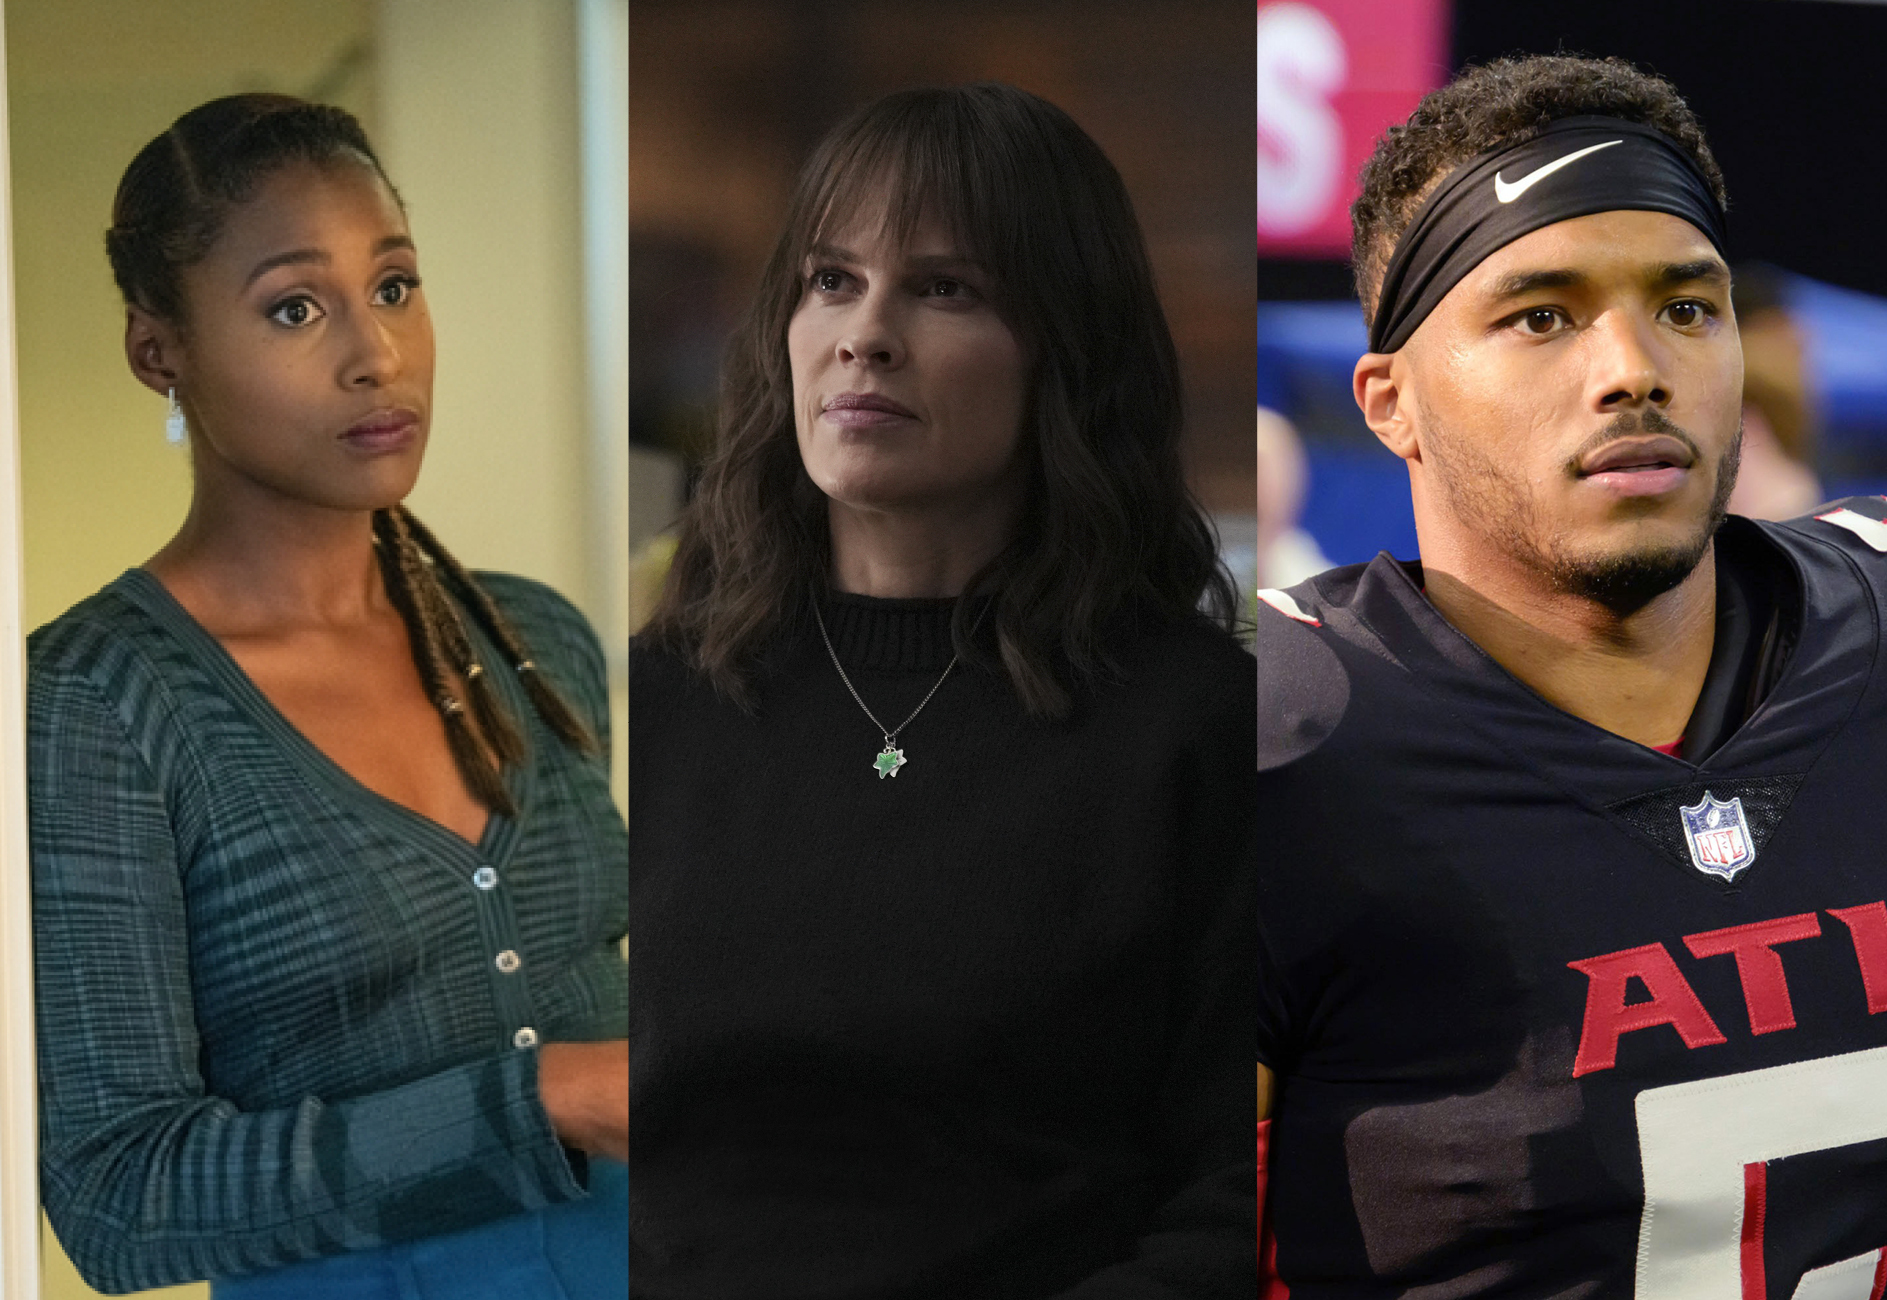 Issa Rae in "Insecure," Hilary Swank in "Alaska Daily," and Rome Flynn in "Fantasy Football"